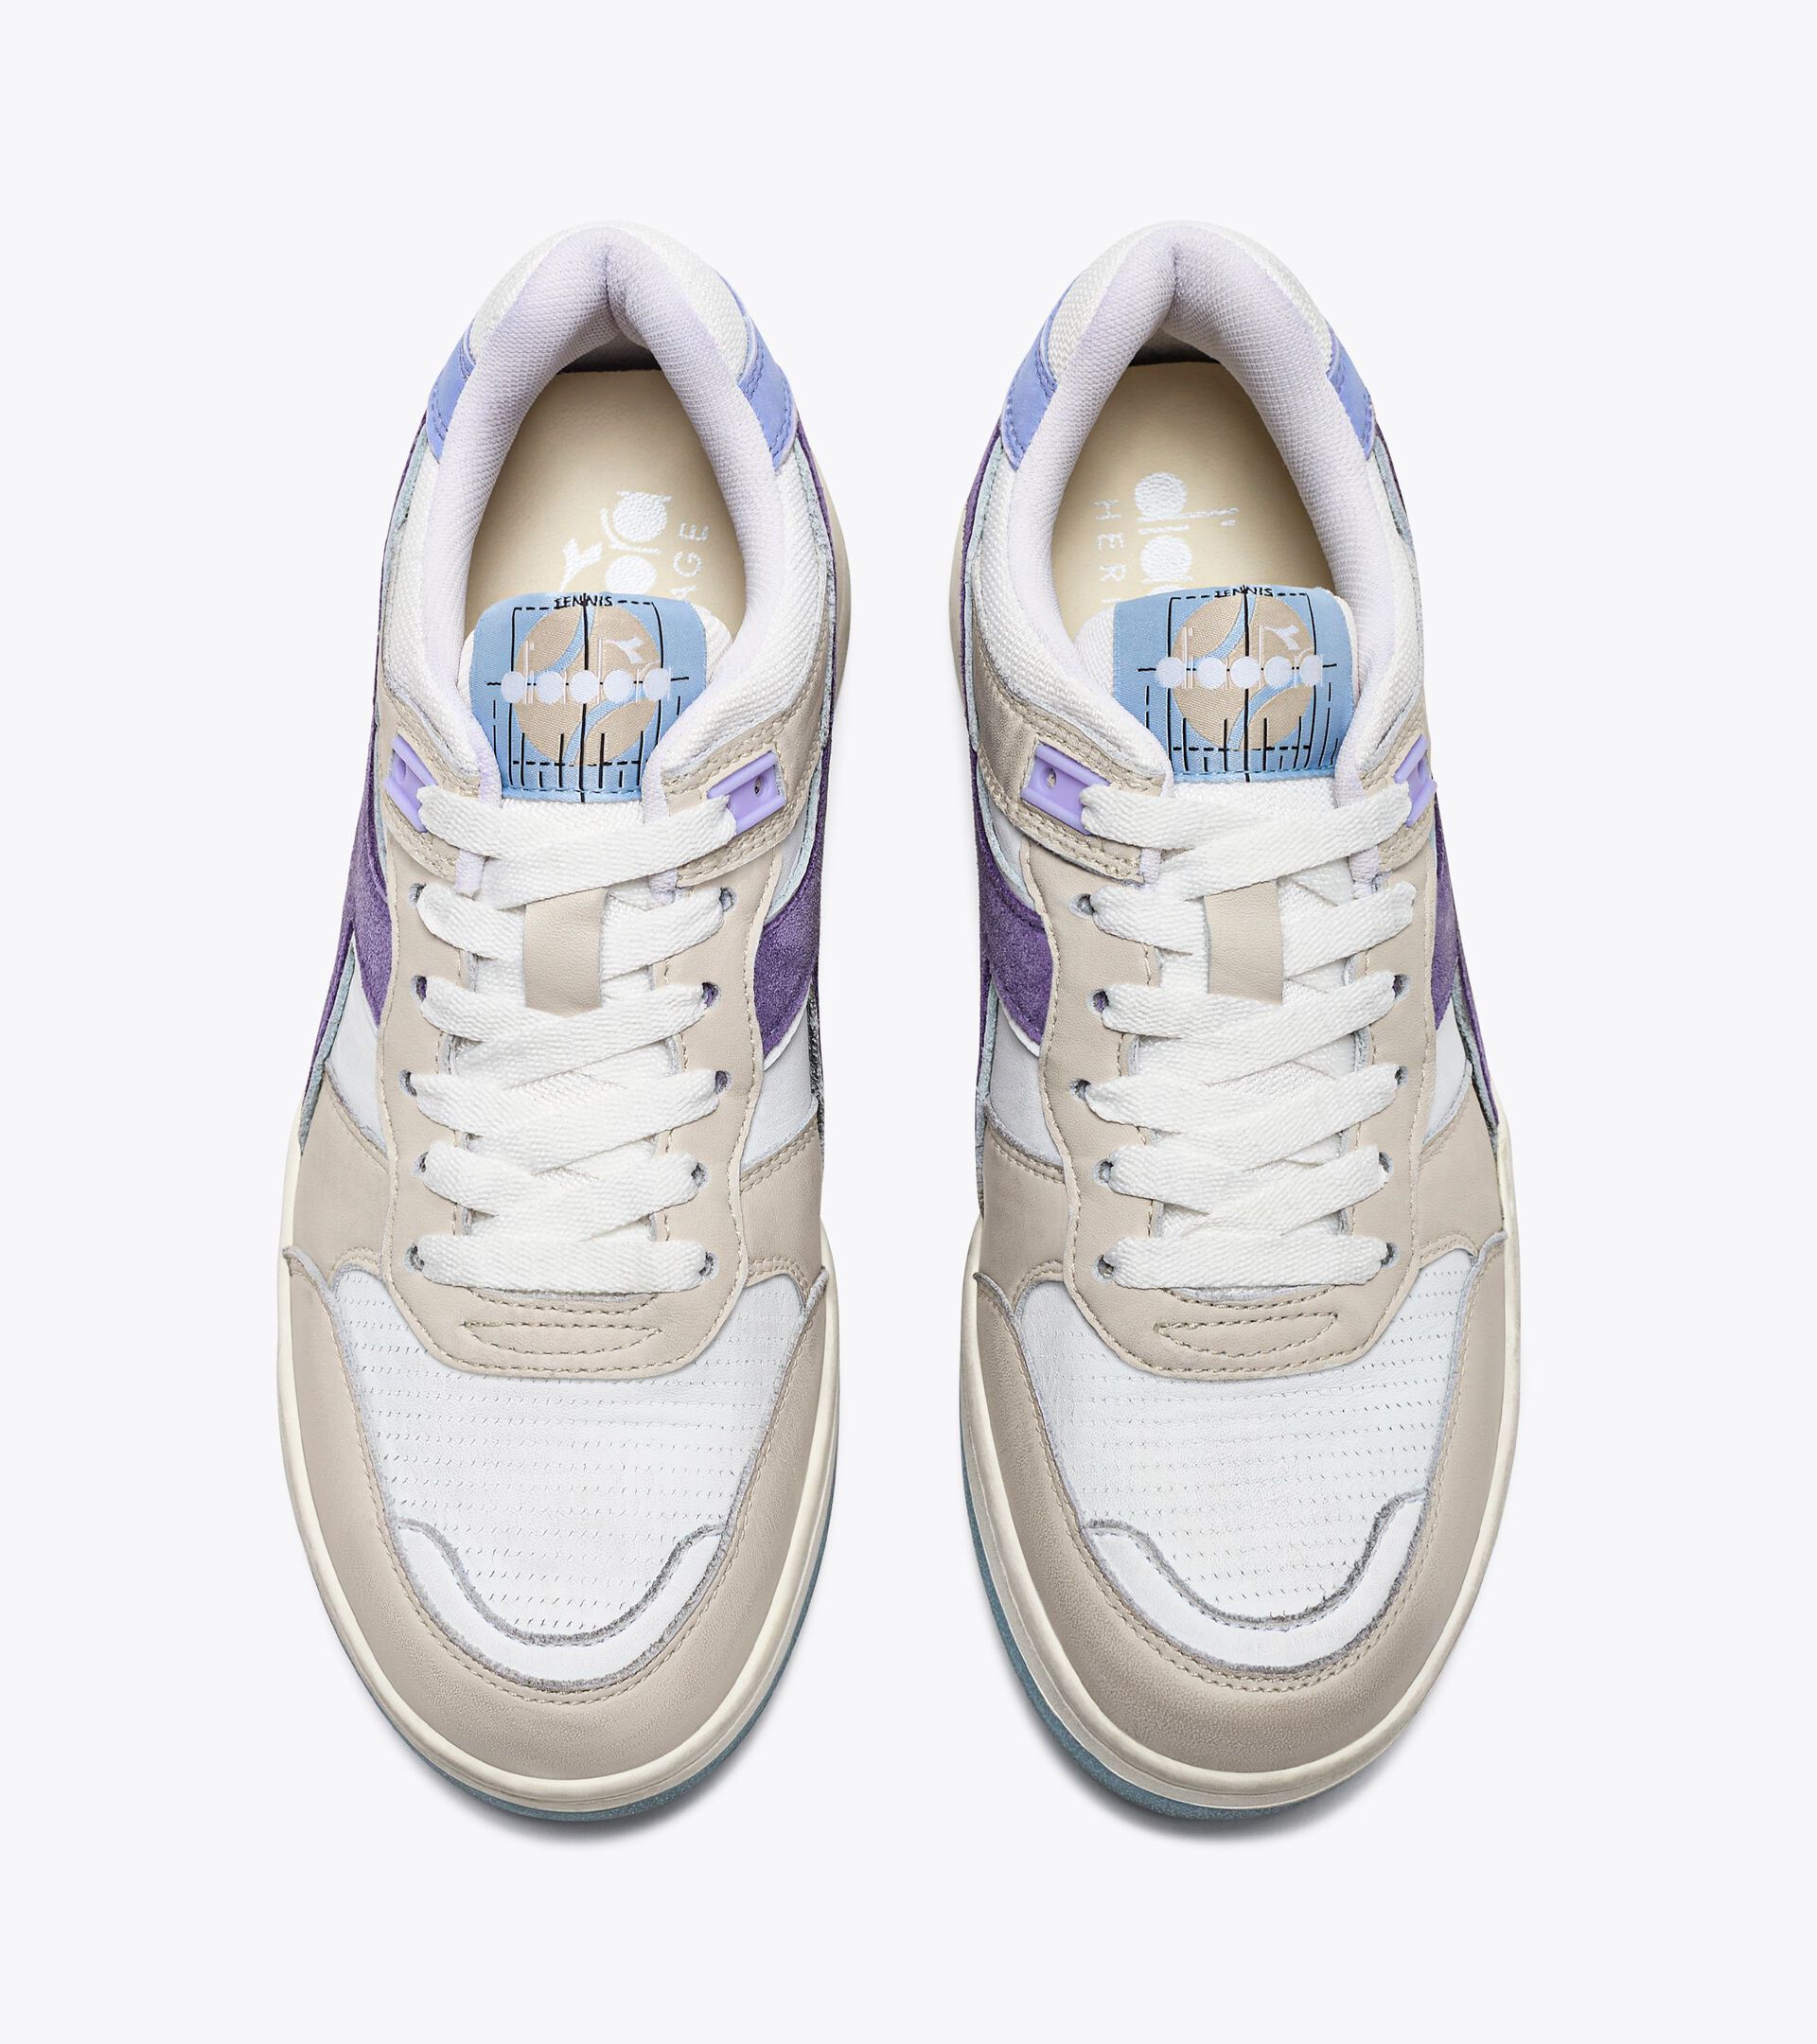 Chaussures Heritage - Gender neutral B.560 USED BLANC/RAYON DE LUNE - Diadora